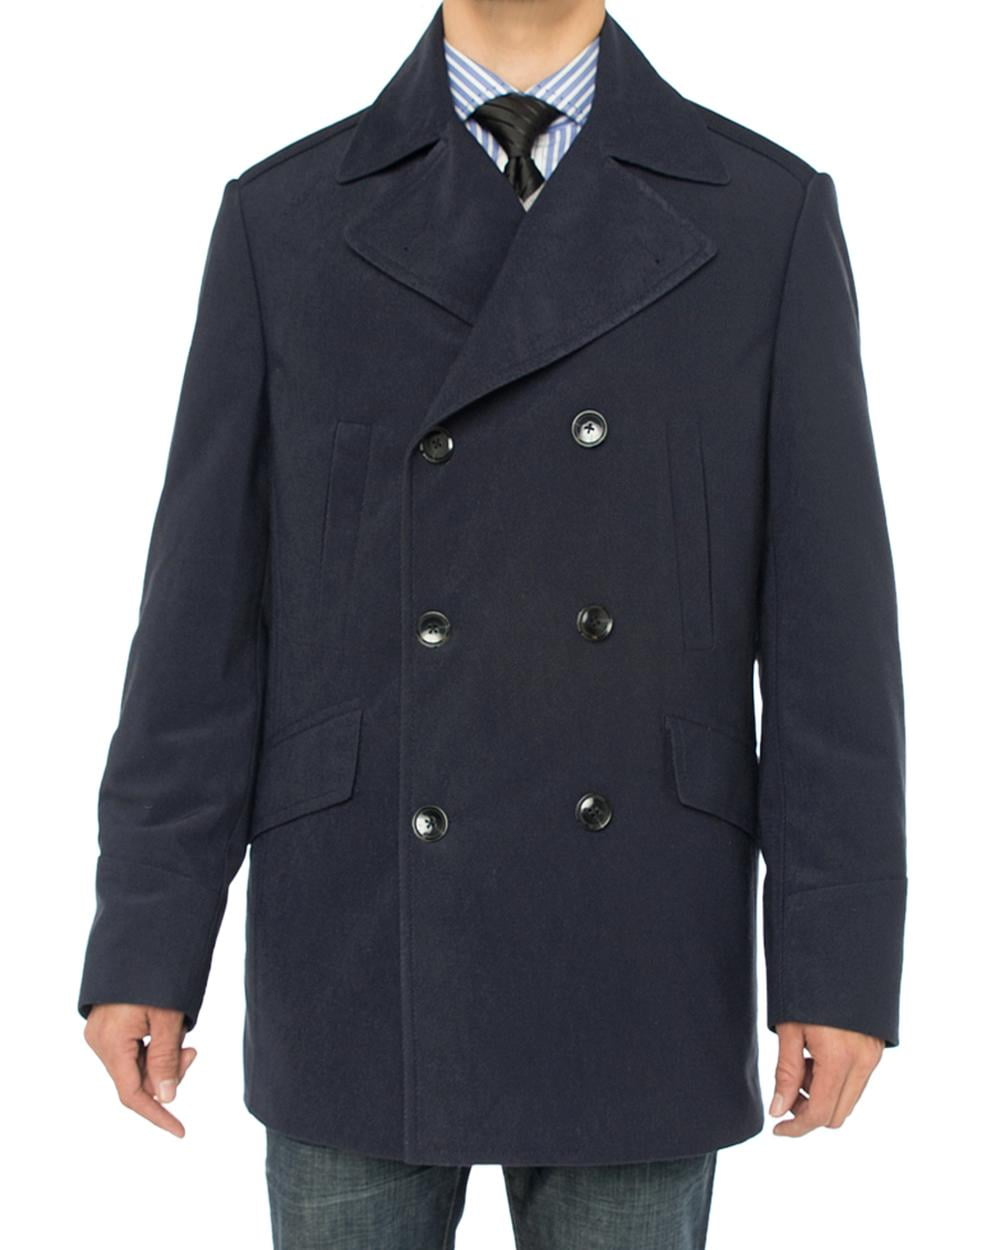 Luciano Natazzi Men's Double Breasted Top Coat Modern Fit Pea Coat Navy ...